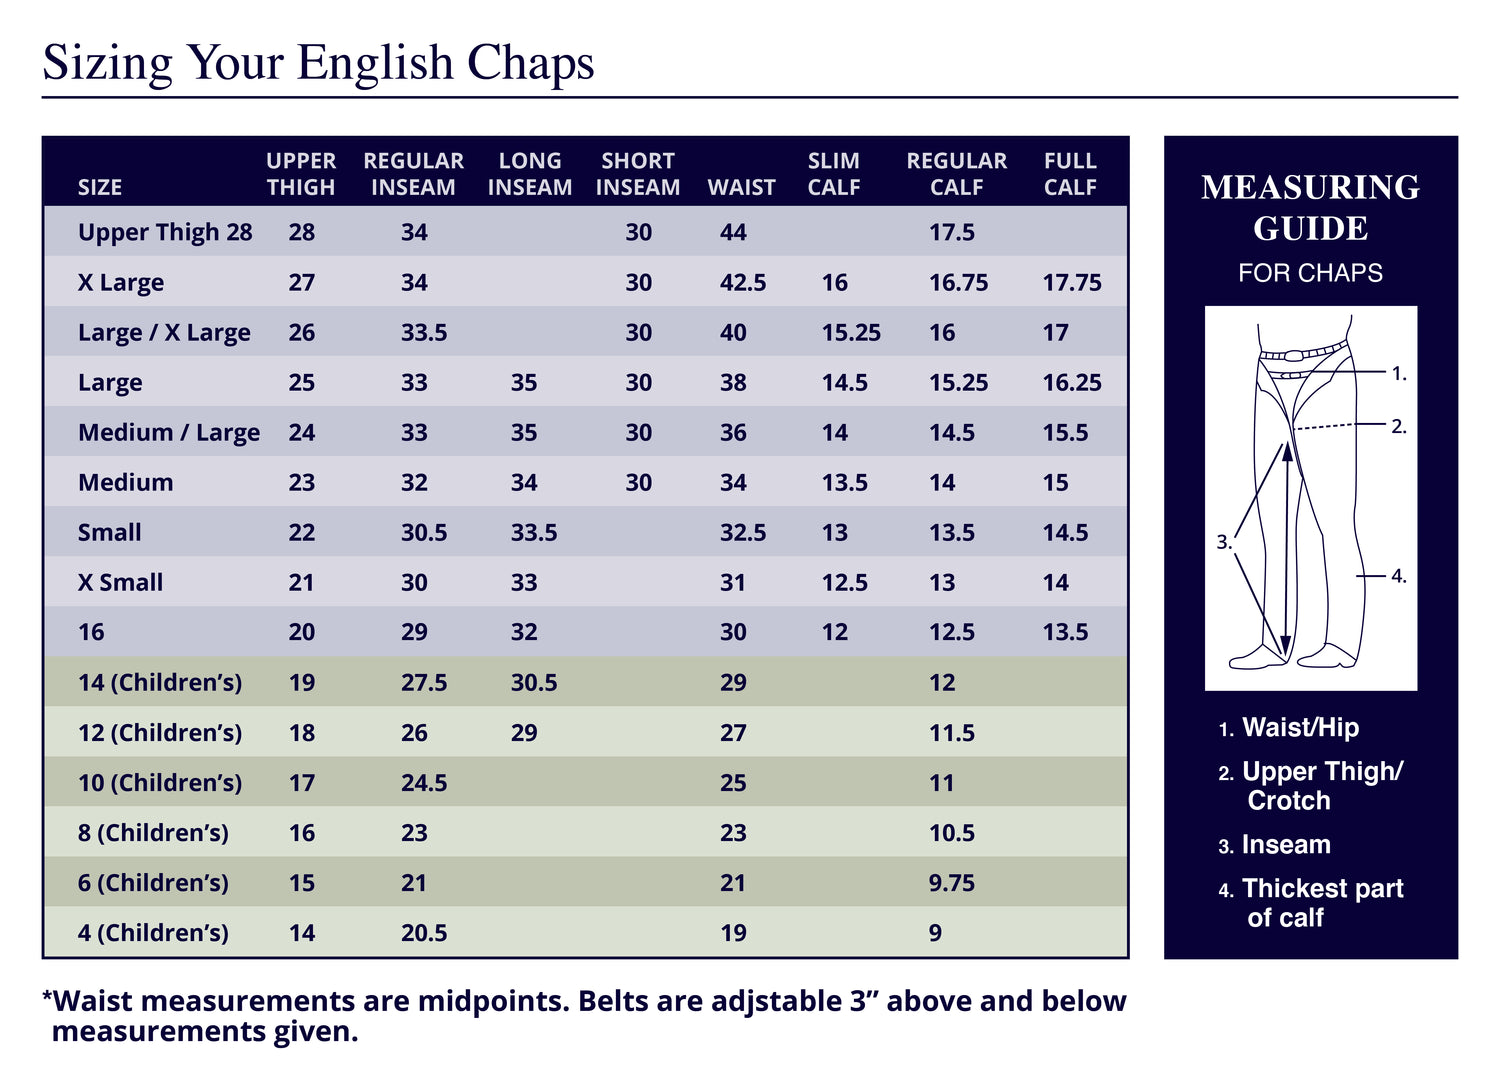 Barnstable Ridings English Schooling Chaps Size Chart